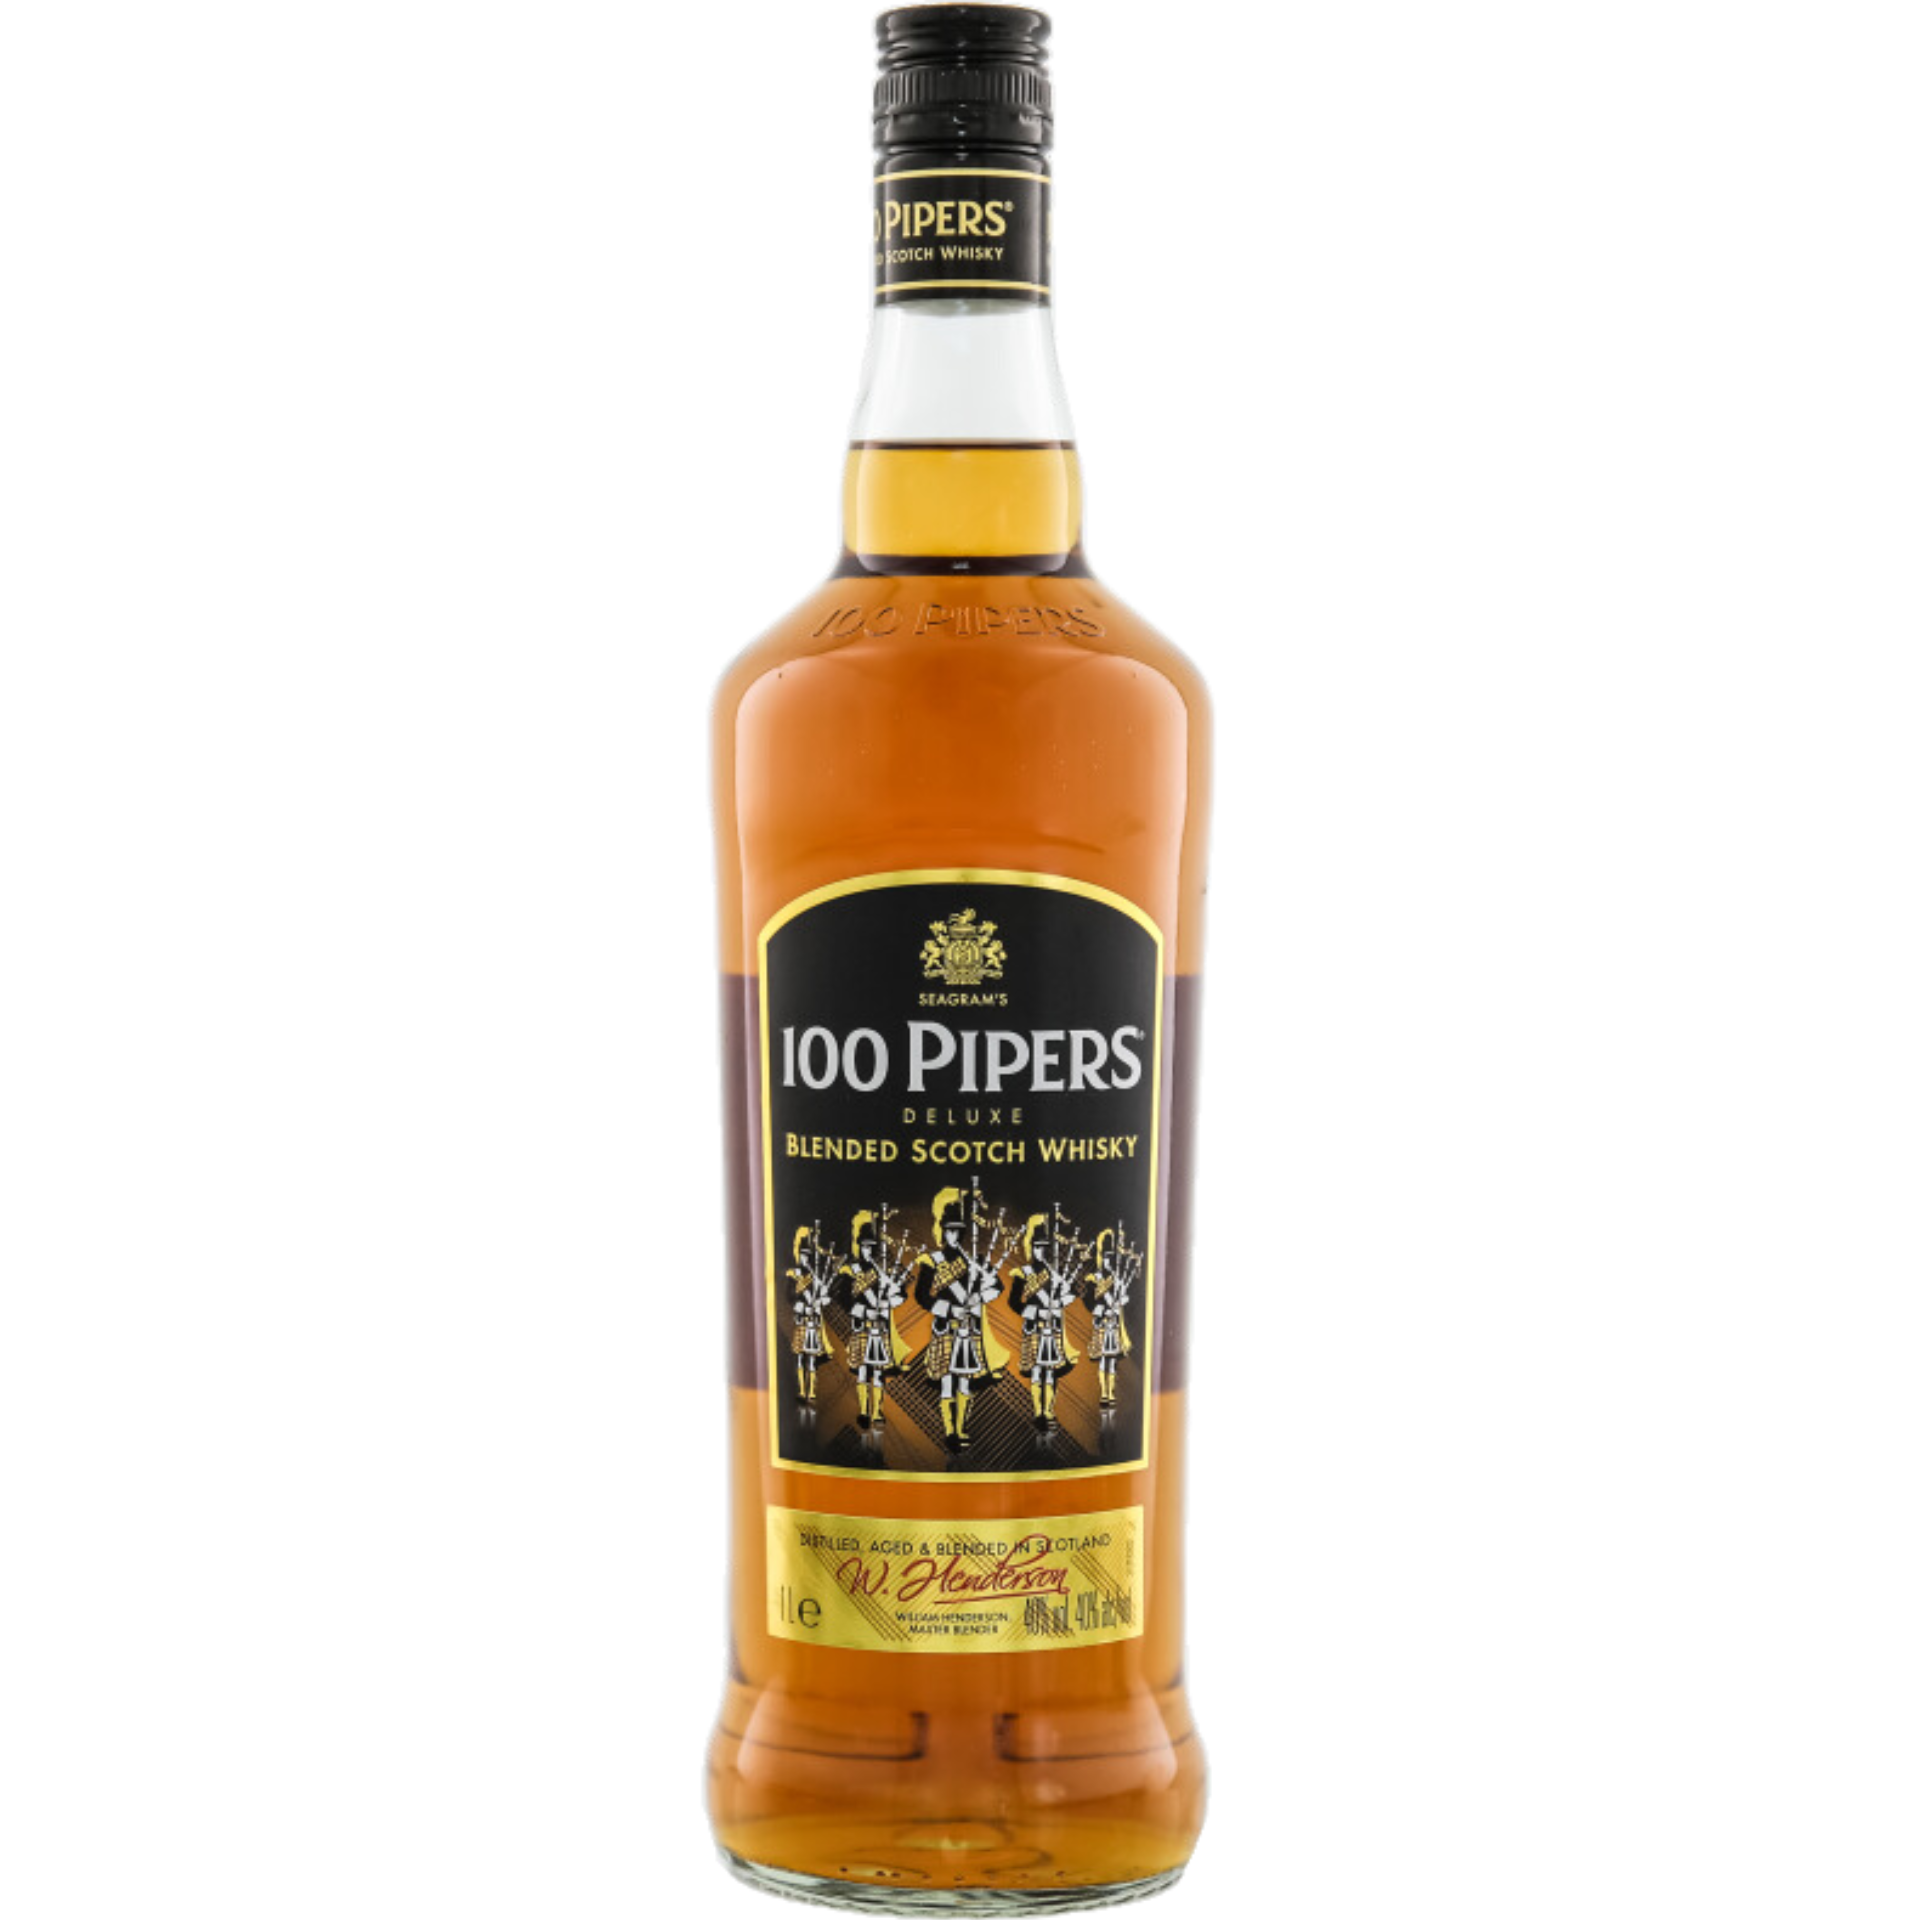 Seagrams 100 Pipers Deluxe Scotch Whisky 40% 1,0l